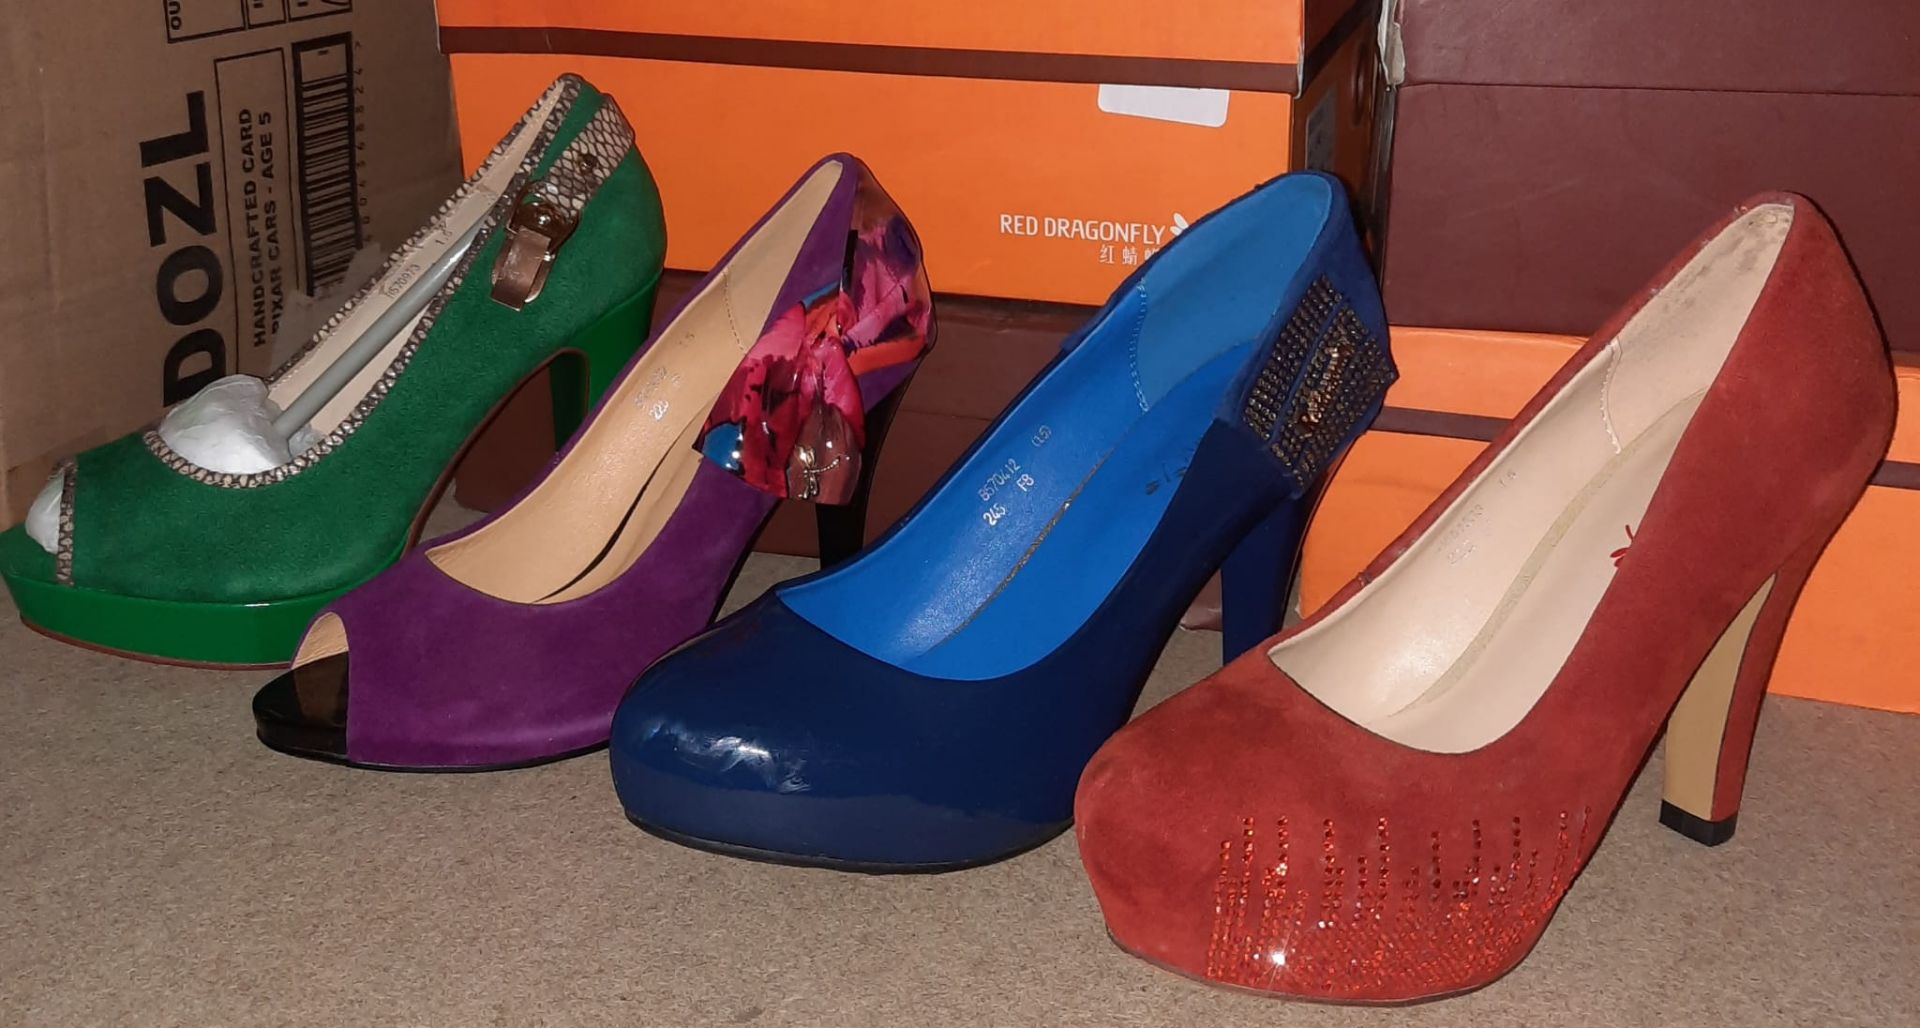 X 4 PAIRS OF LADIES SHOES IN VARIOUS STYLES COLOURS AND SIZES - NEW WITH DAMAGED BOXES.